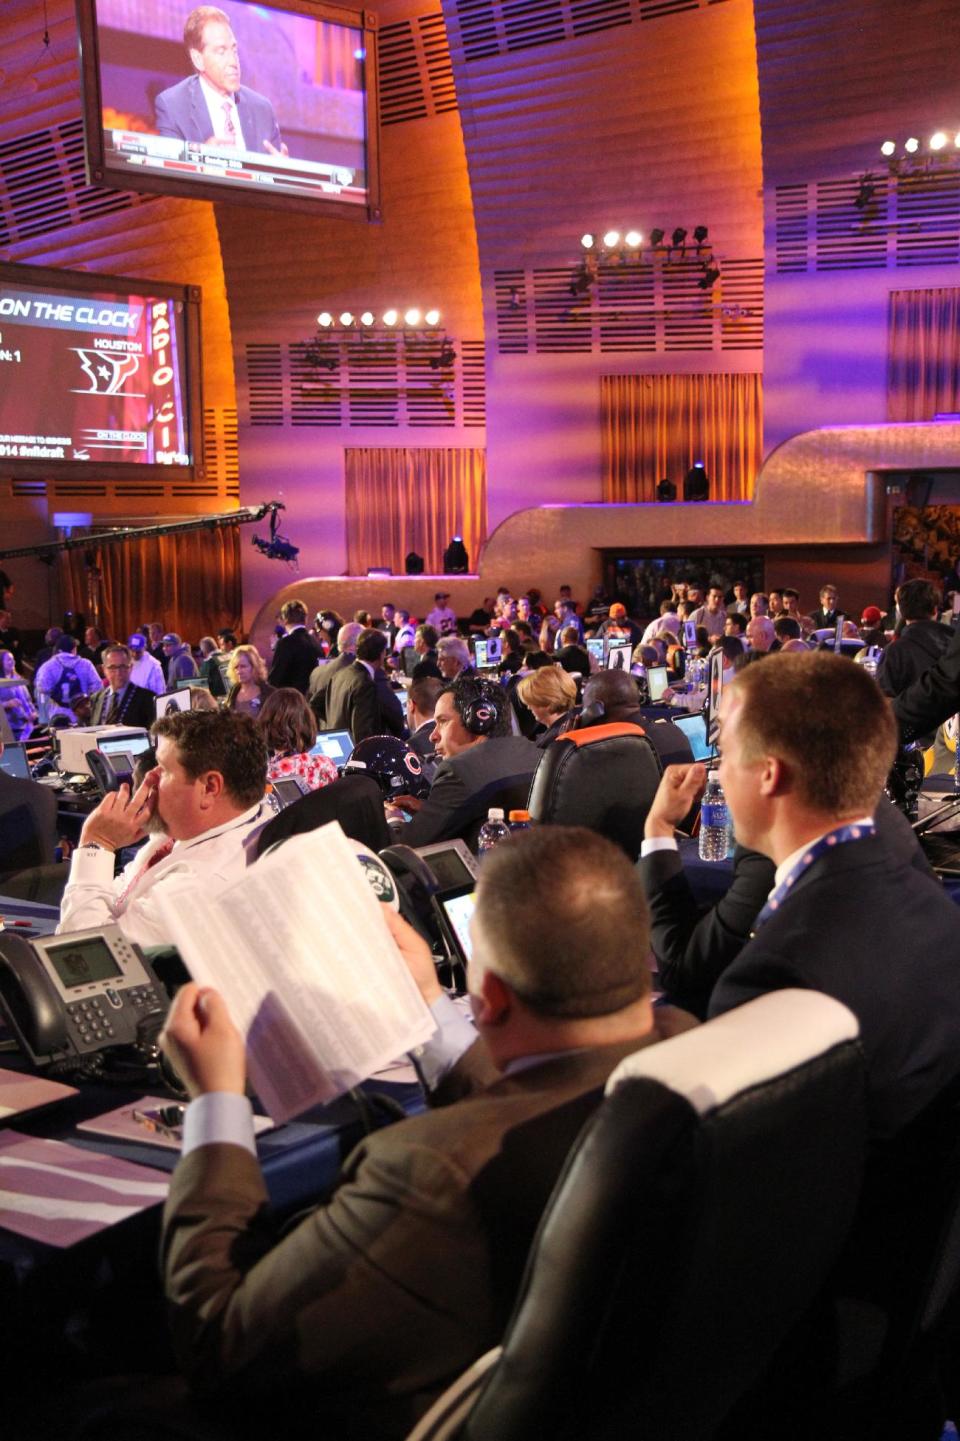 Teams prepare in Radio Music Hall for the NFL Draft 2014 on Thursday May 8th, 2014 in New York. (Jamie Herrmann/AP Images)